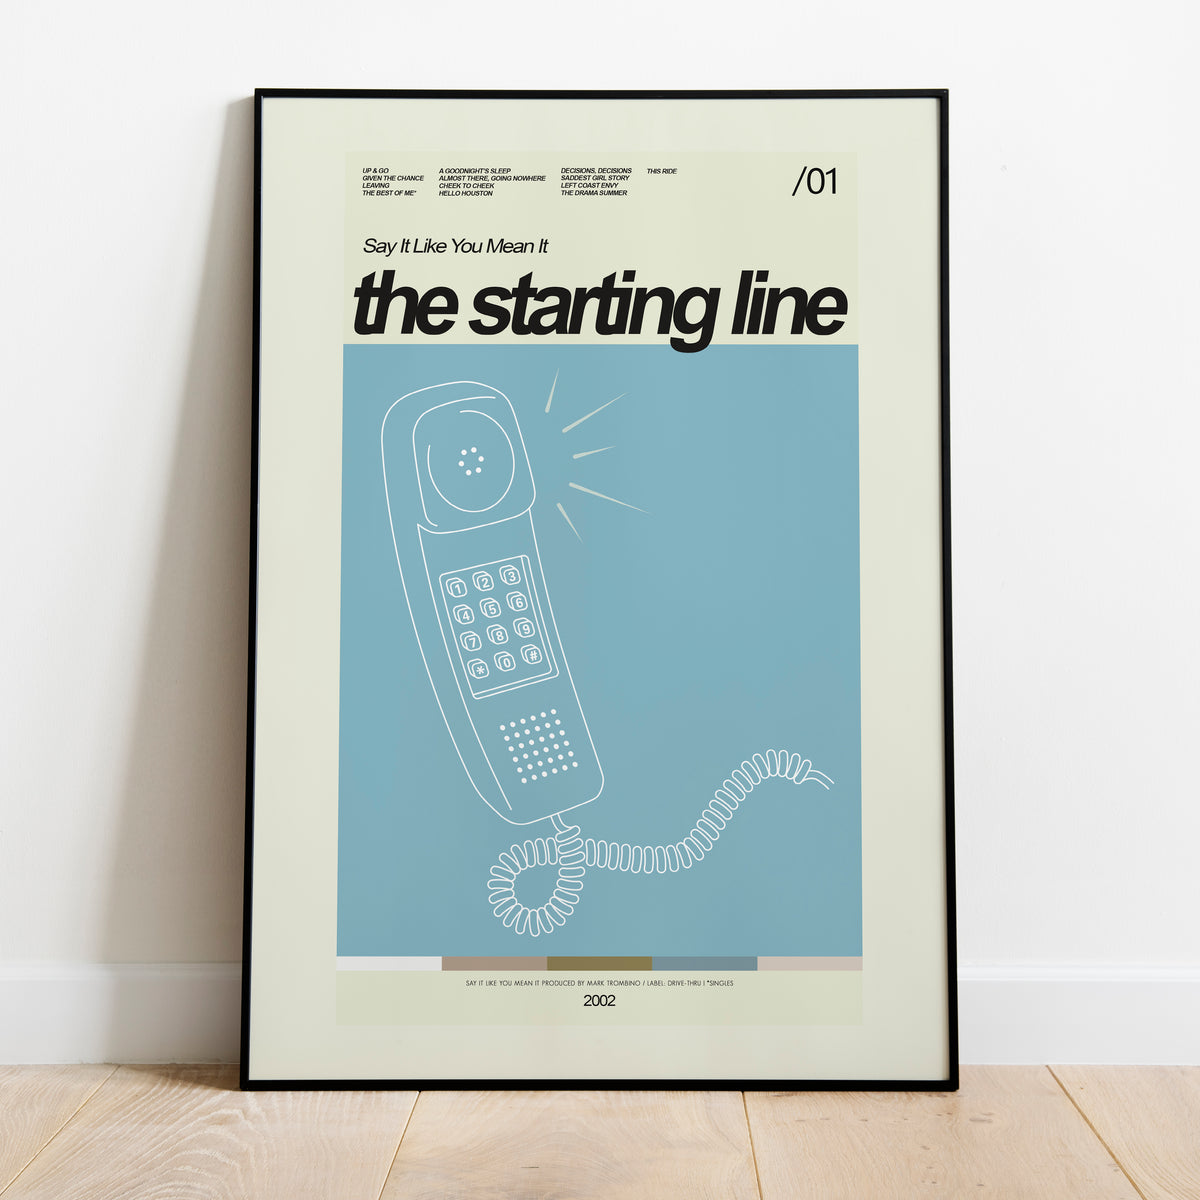 The Starting Line - Say It Like You Mean It (Album) Inspired | 12"x18" or 18"x24" Print only